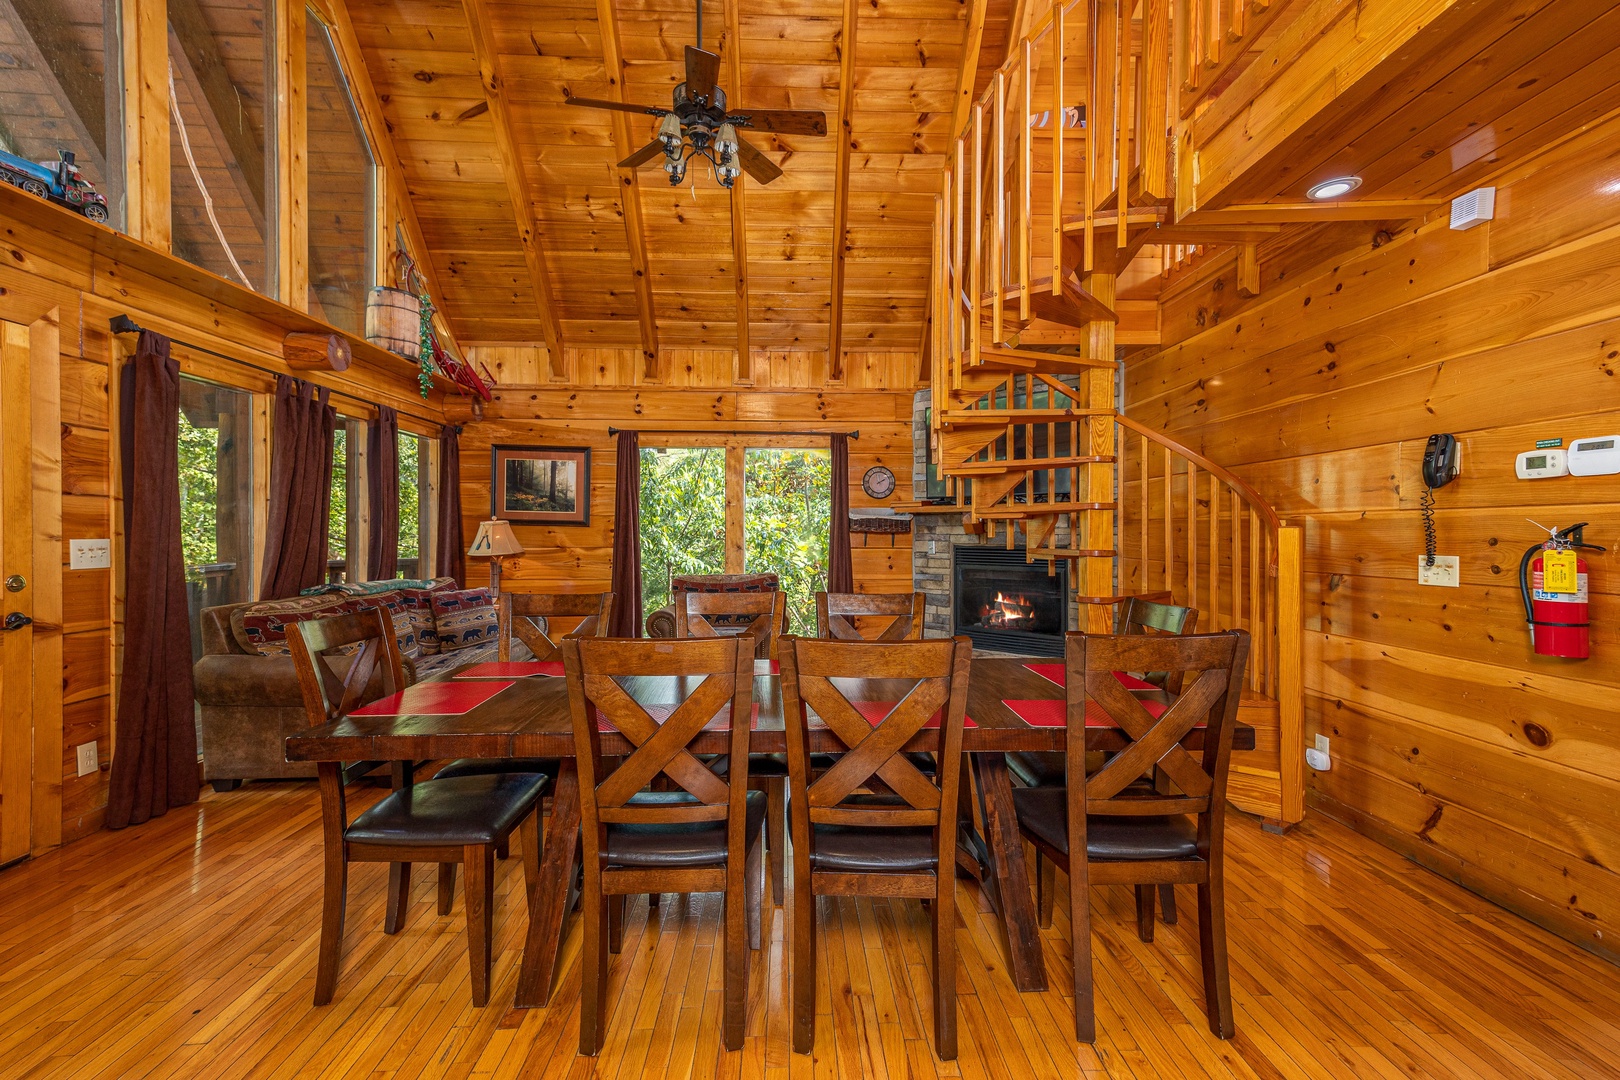 Dining for 8 at The Great Outdoors, a 3 bedroom cabin rental located in Pigeon Forge